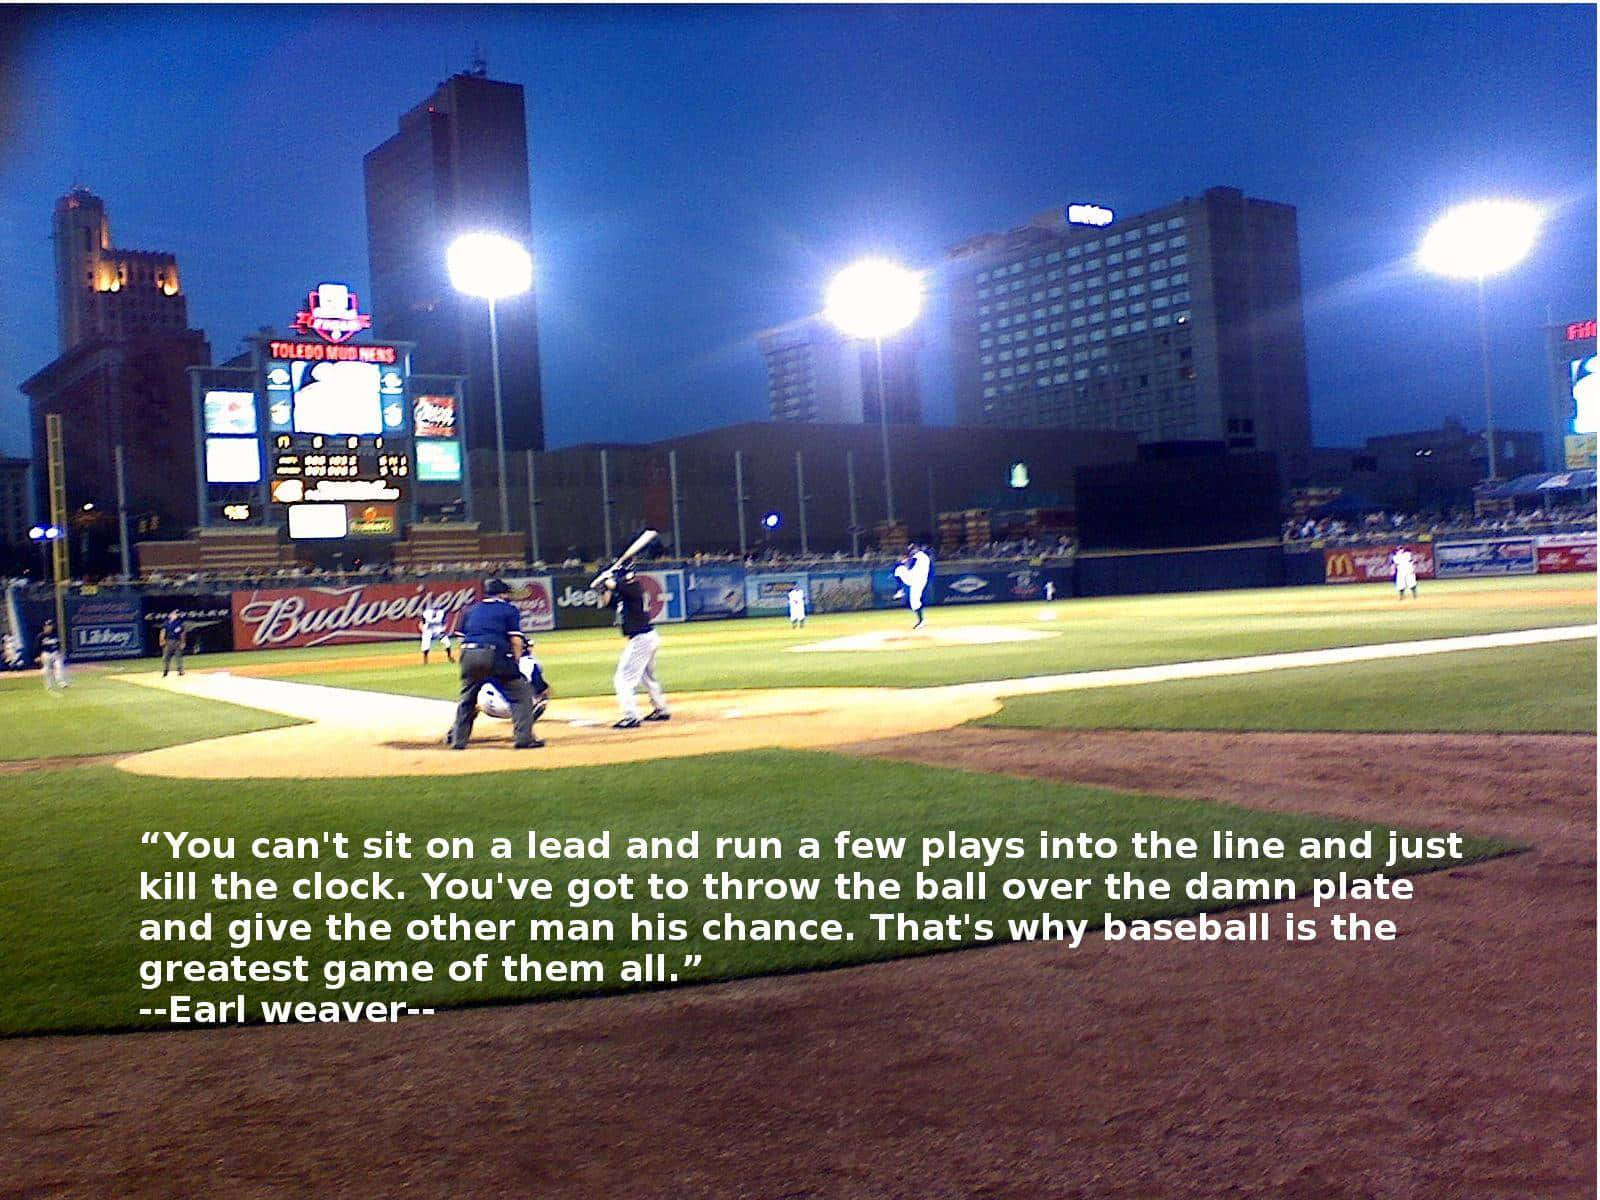 "Don't let the fear of striking out keep you from playing the game." Wallpaper